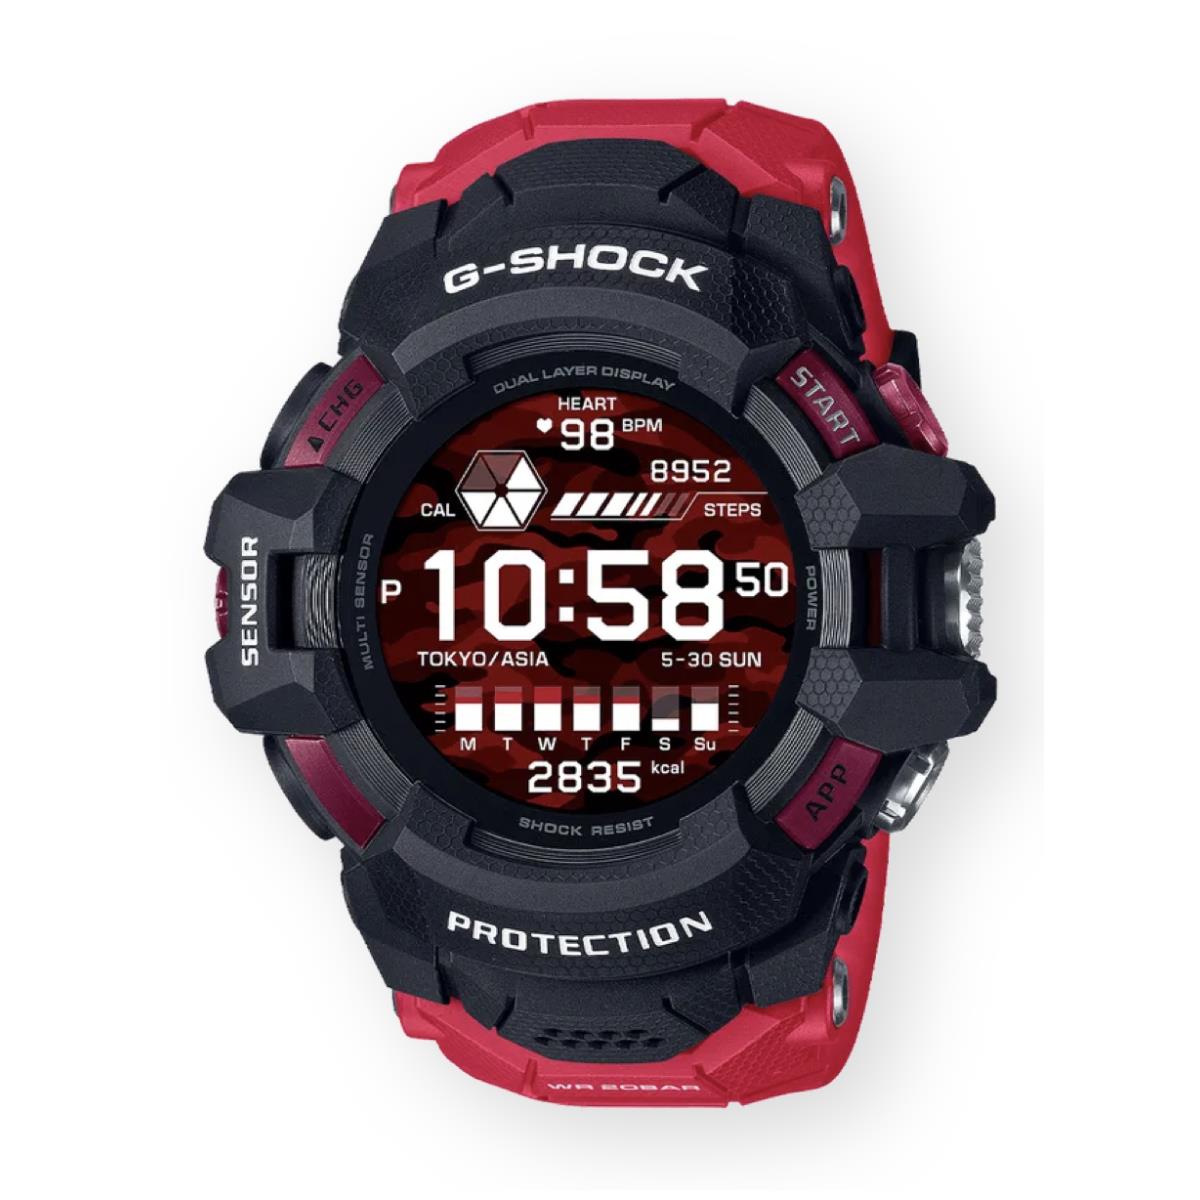 Casio G-shock Gps Heart Rate Monitor Digital Sport GSWH1000-1A4 Limited Edition - Red Band